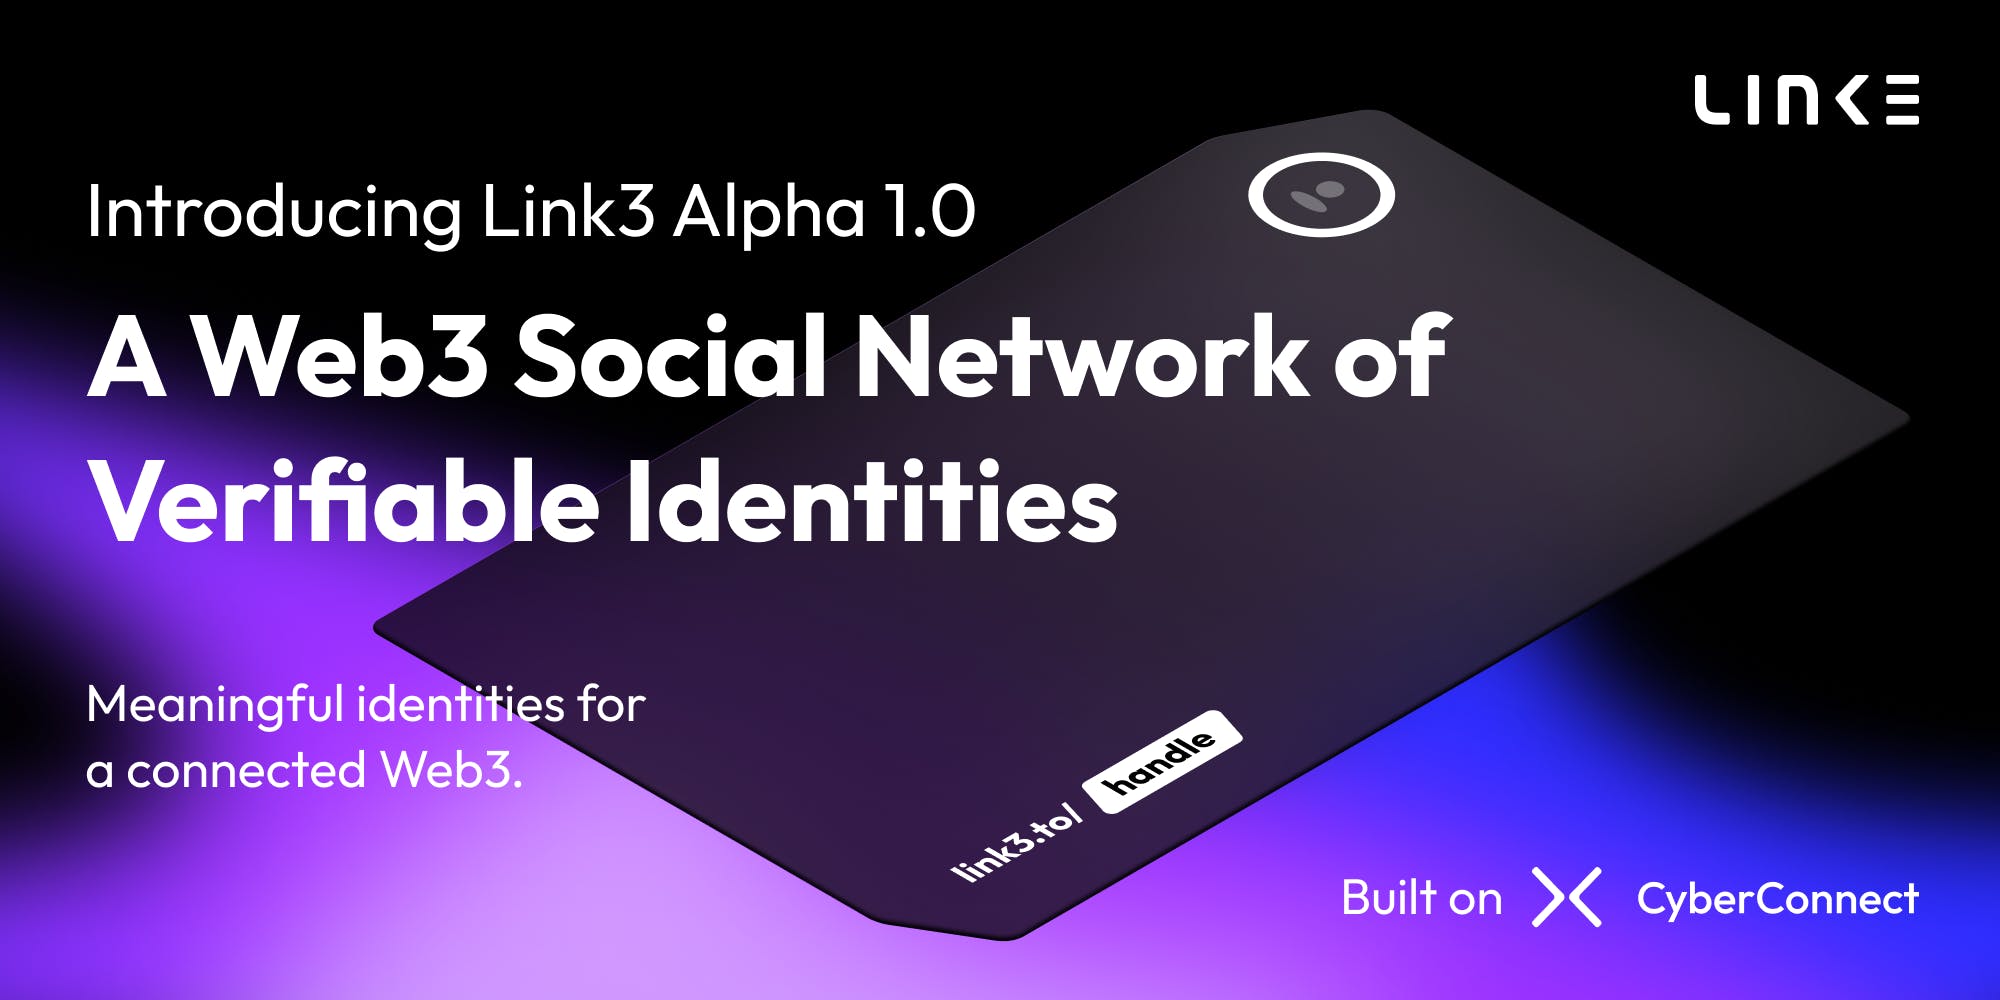 ntroducing Link3: A Social Network of Verifiable Identities